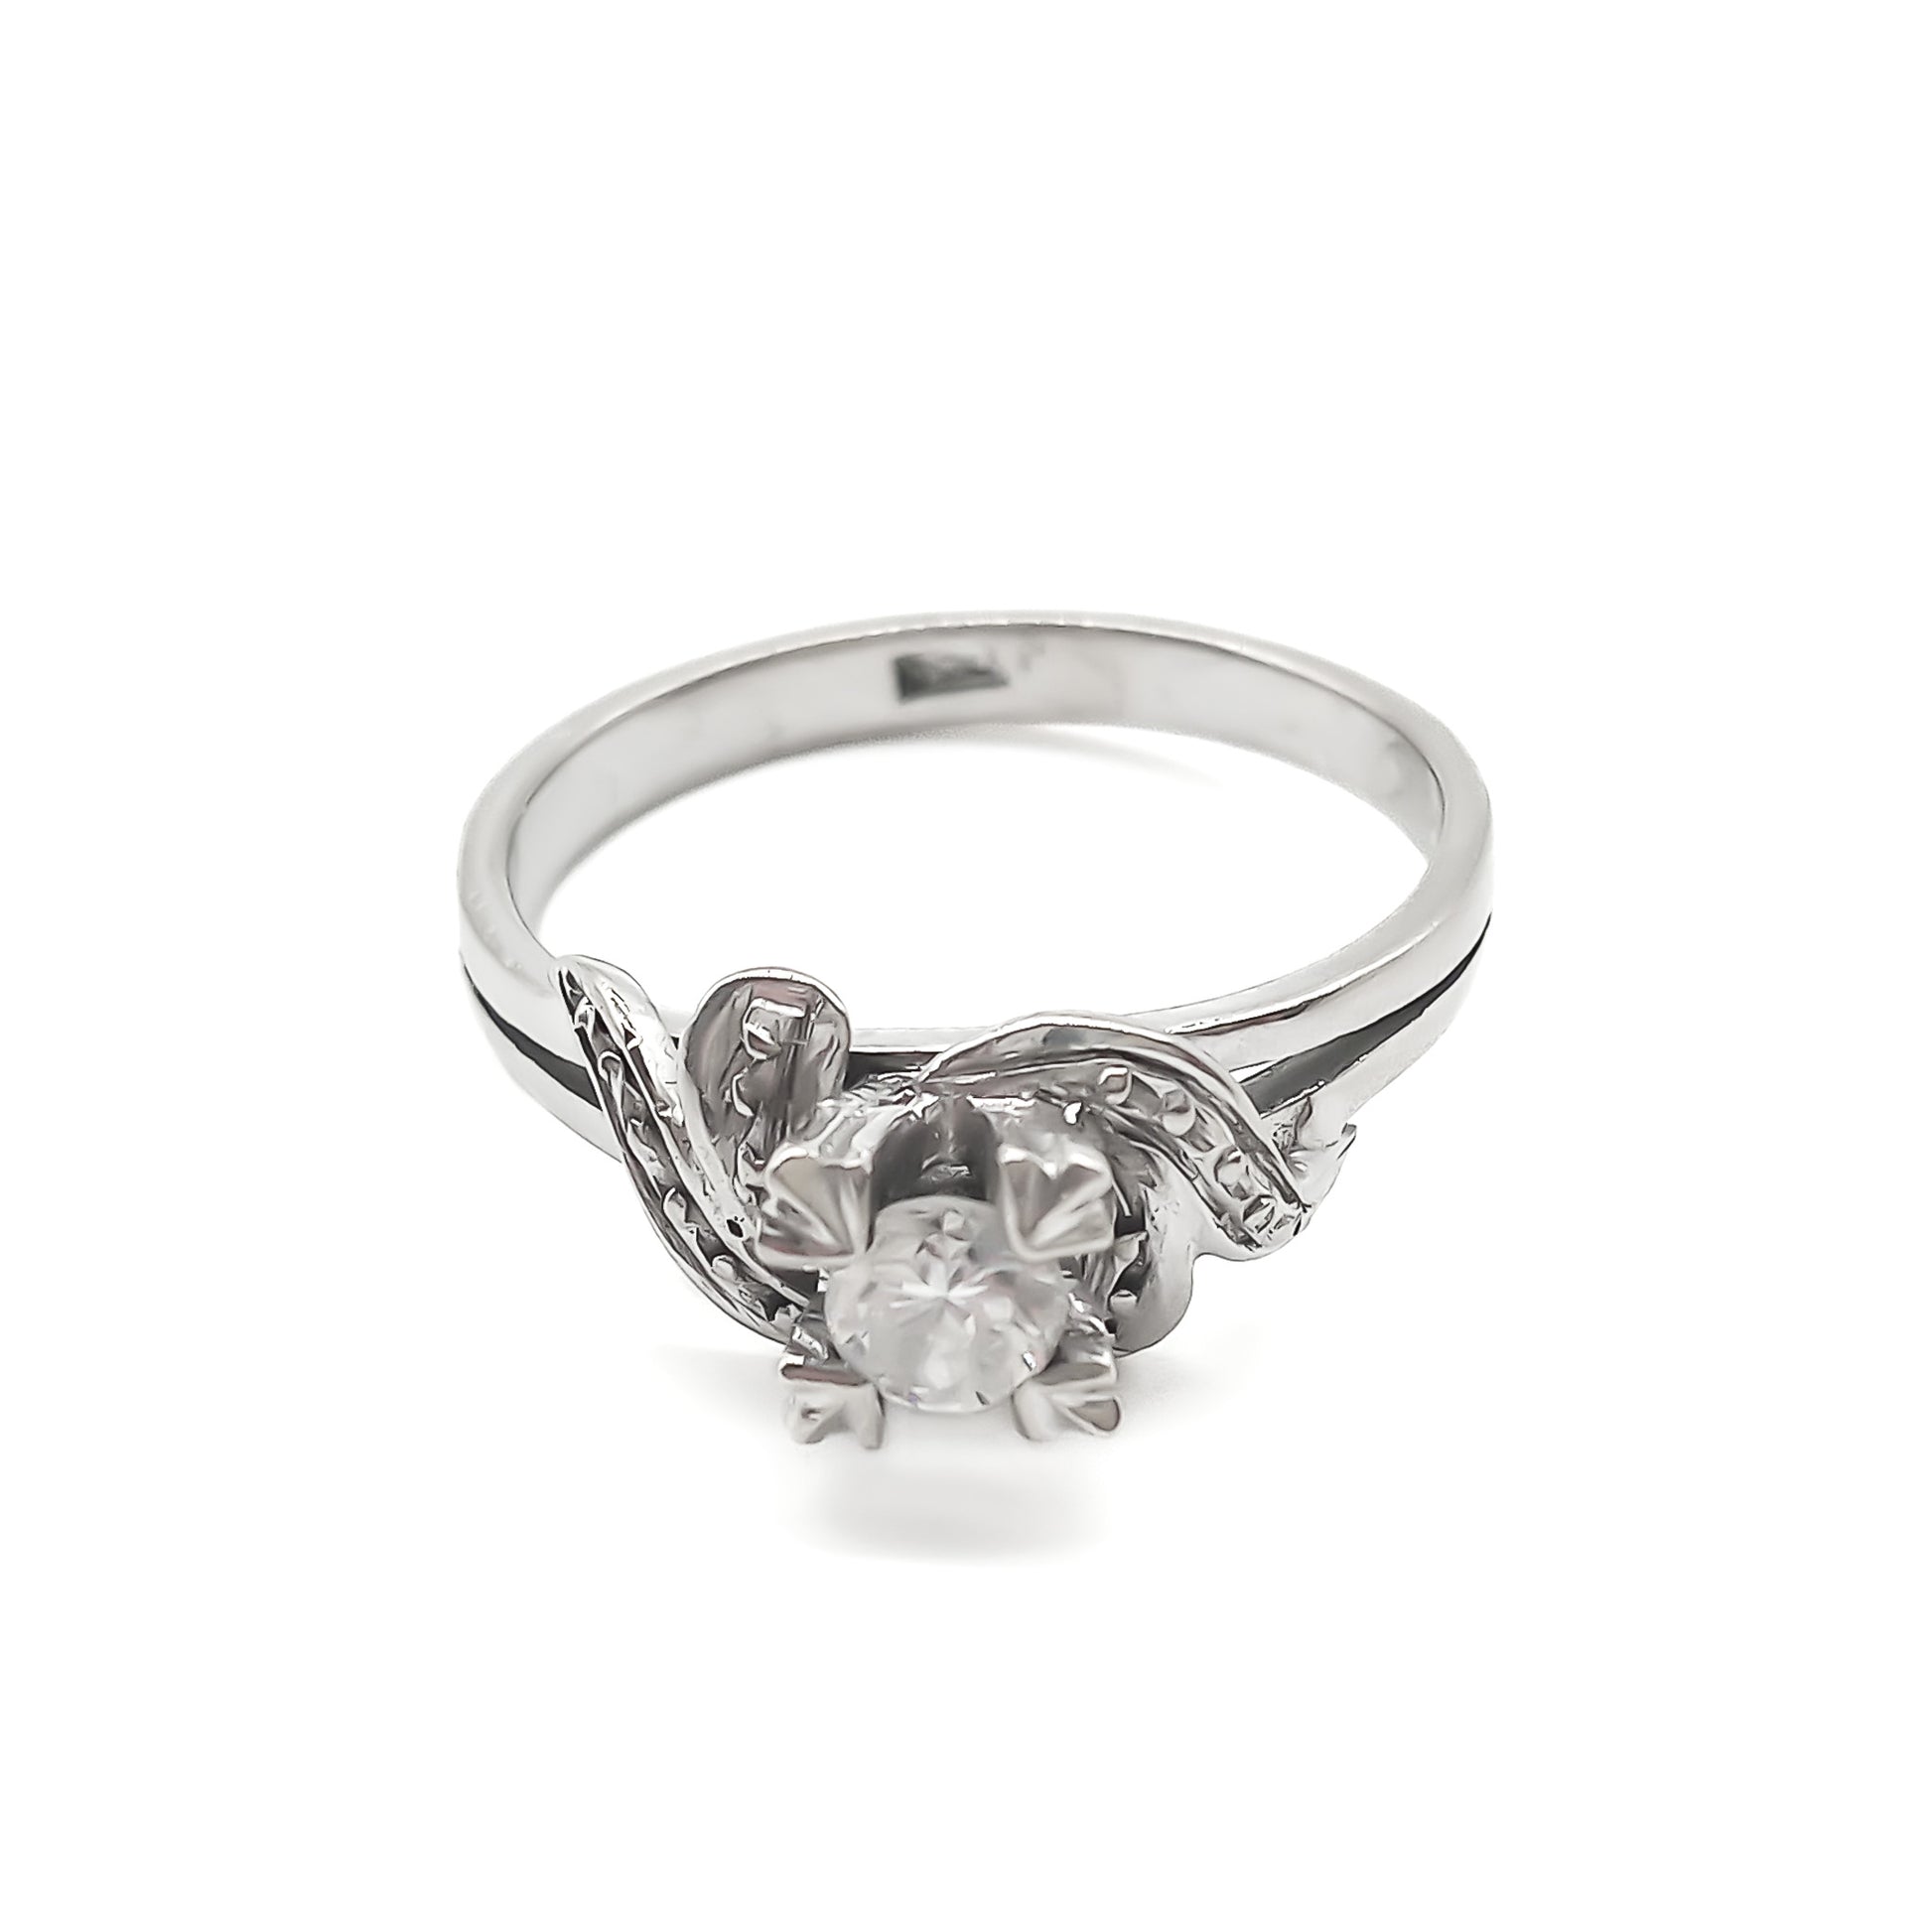  Classic 18ct white gold solitaire diamond ring with lovely flourish detail. 